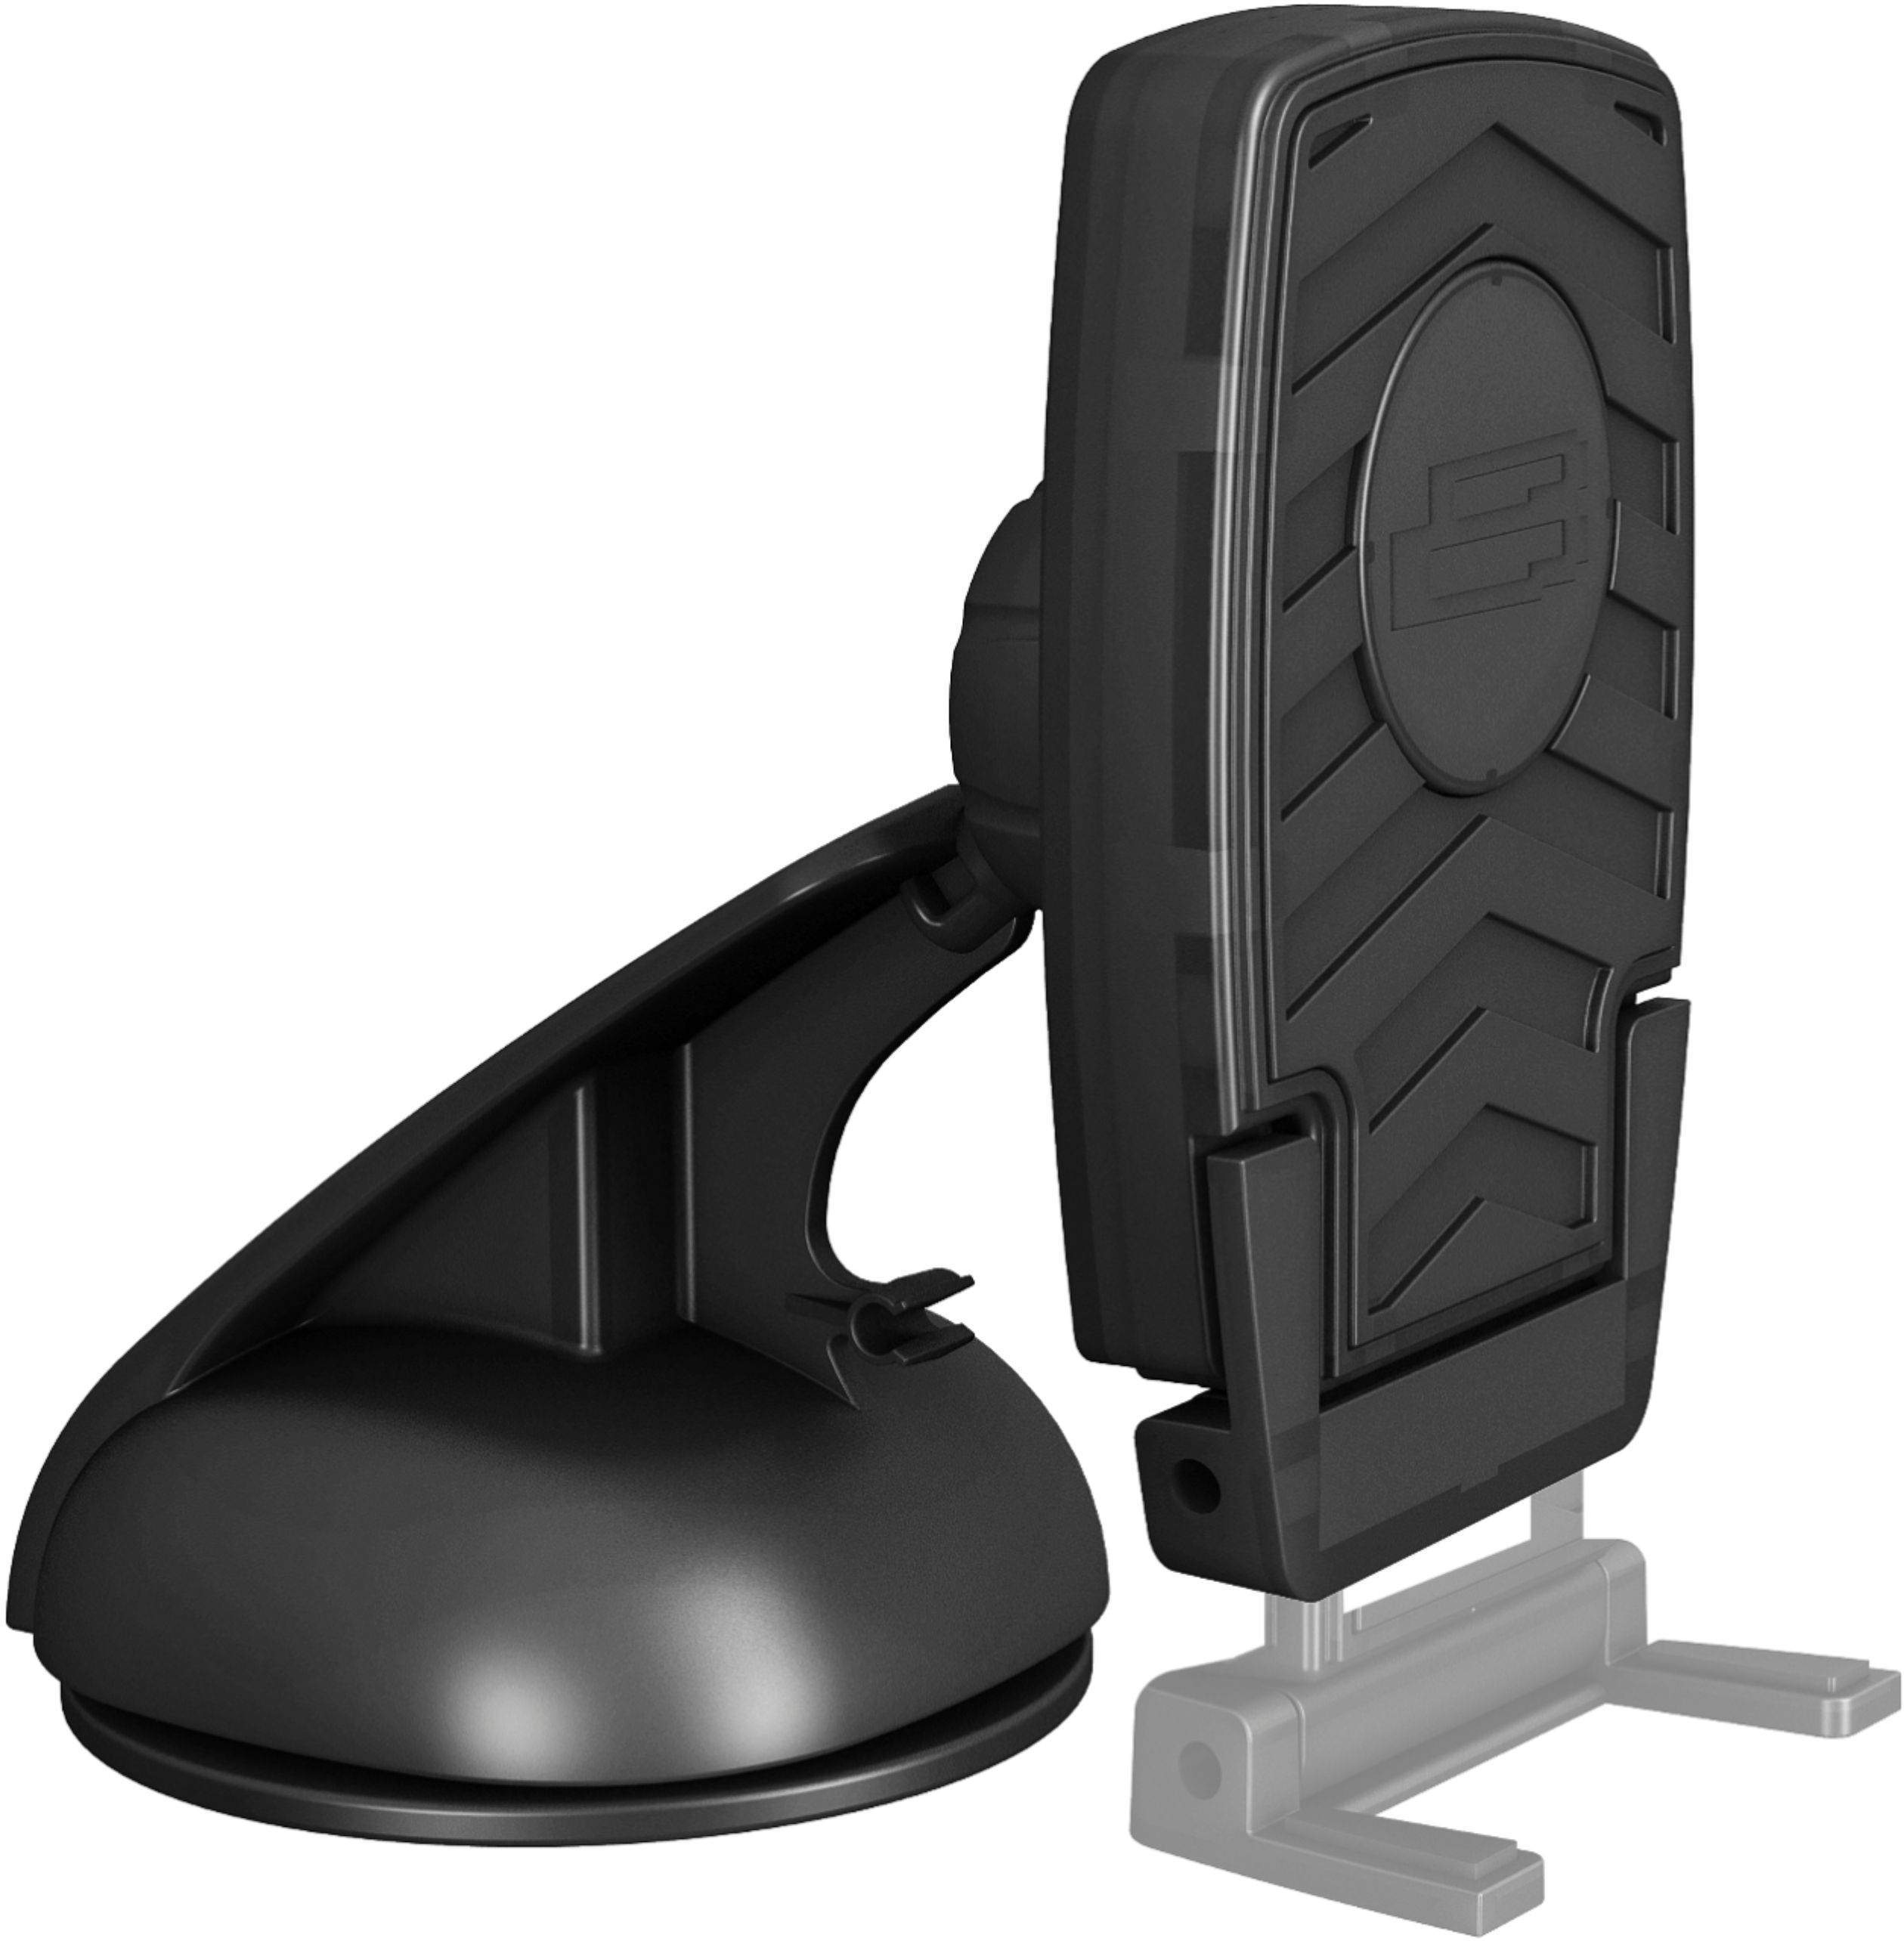 Angle View: Xentris - Vehicle Charger - Black